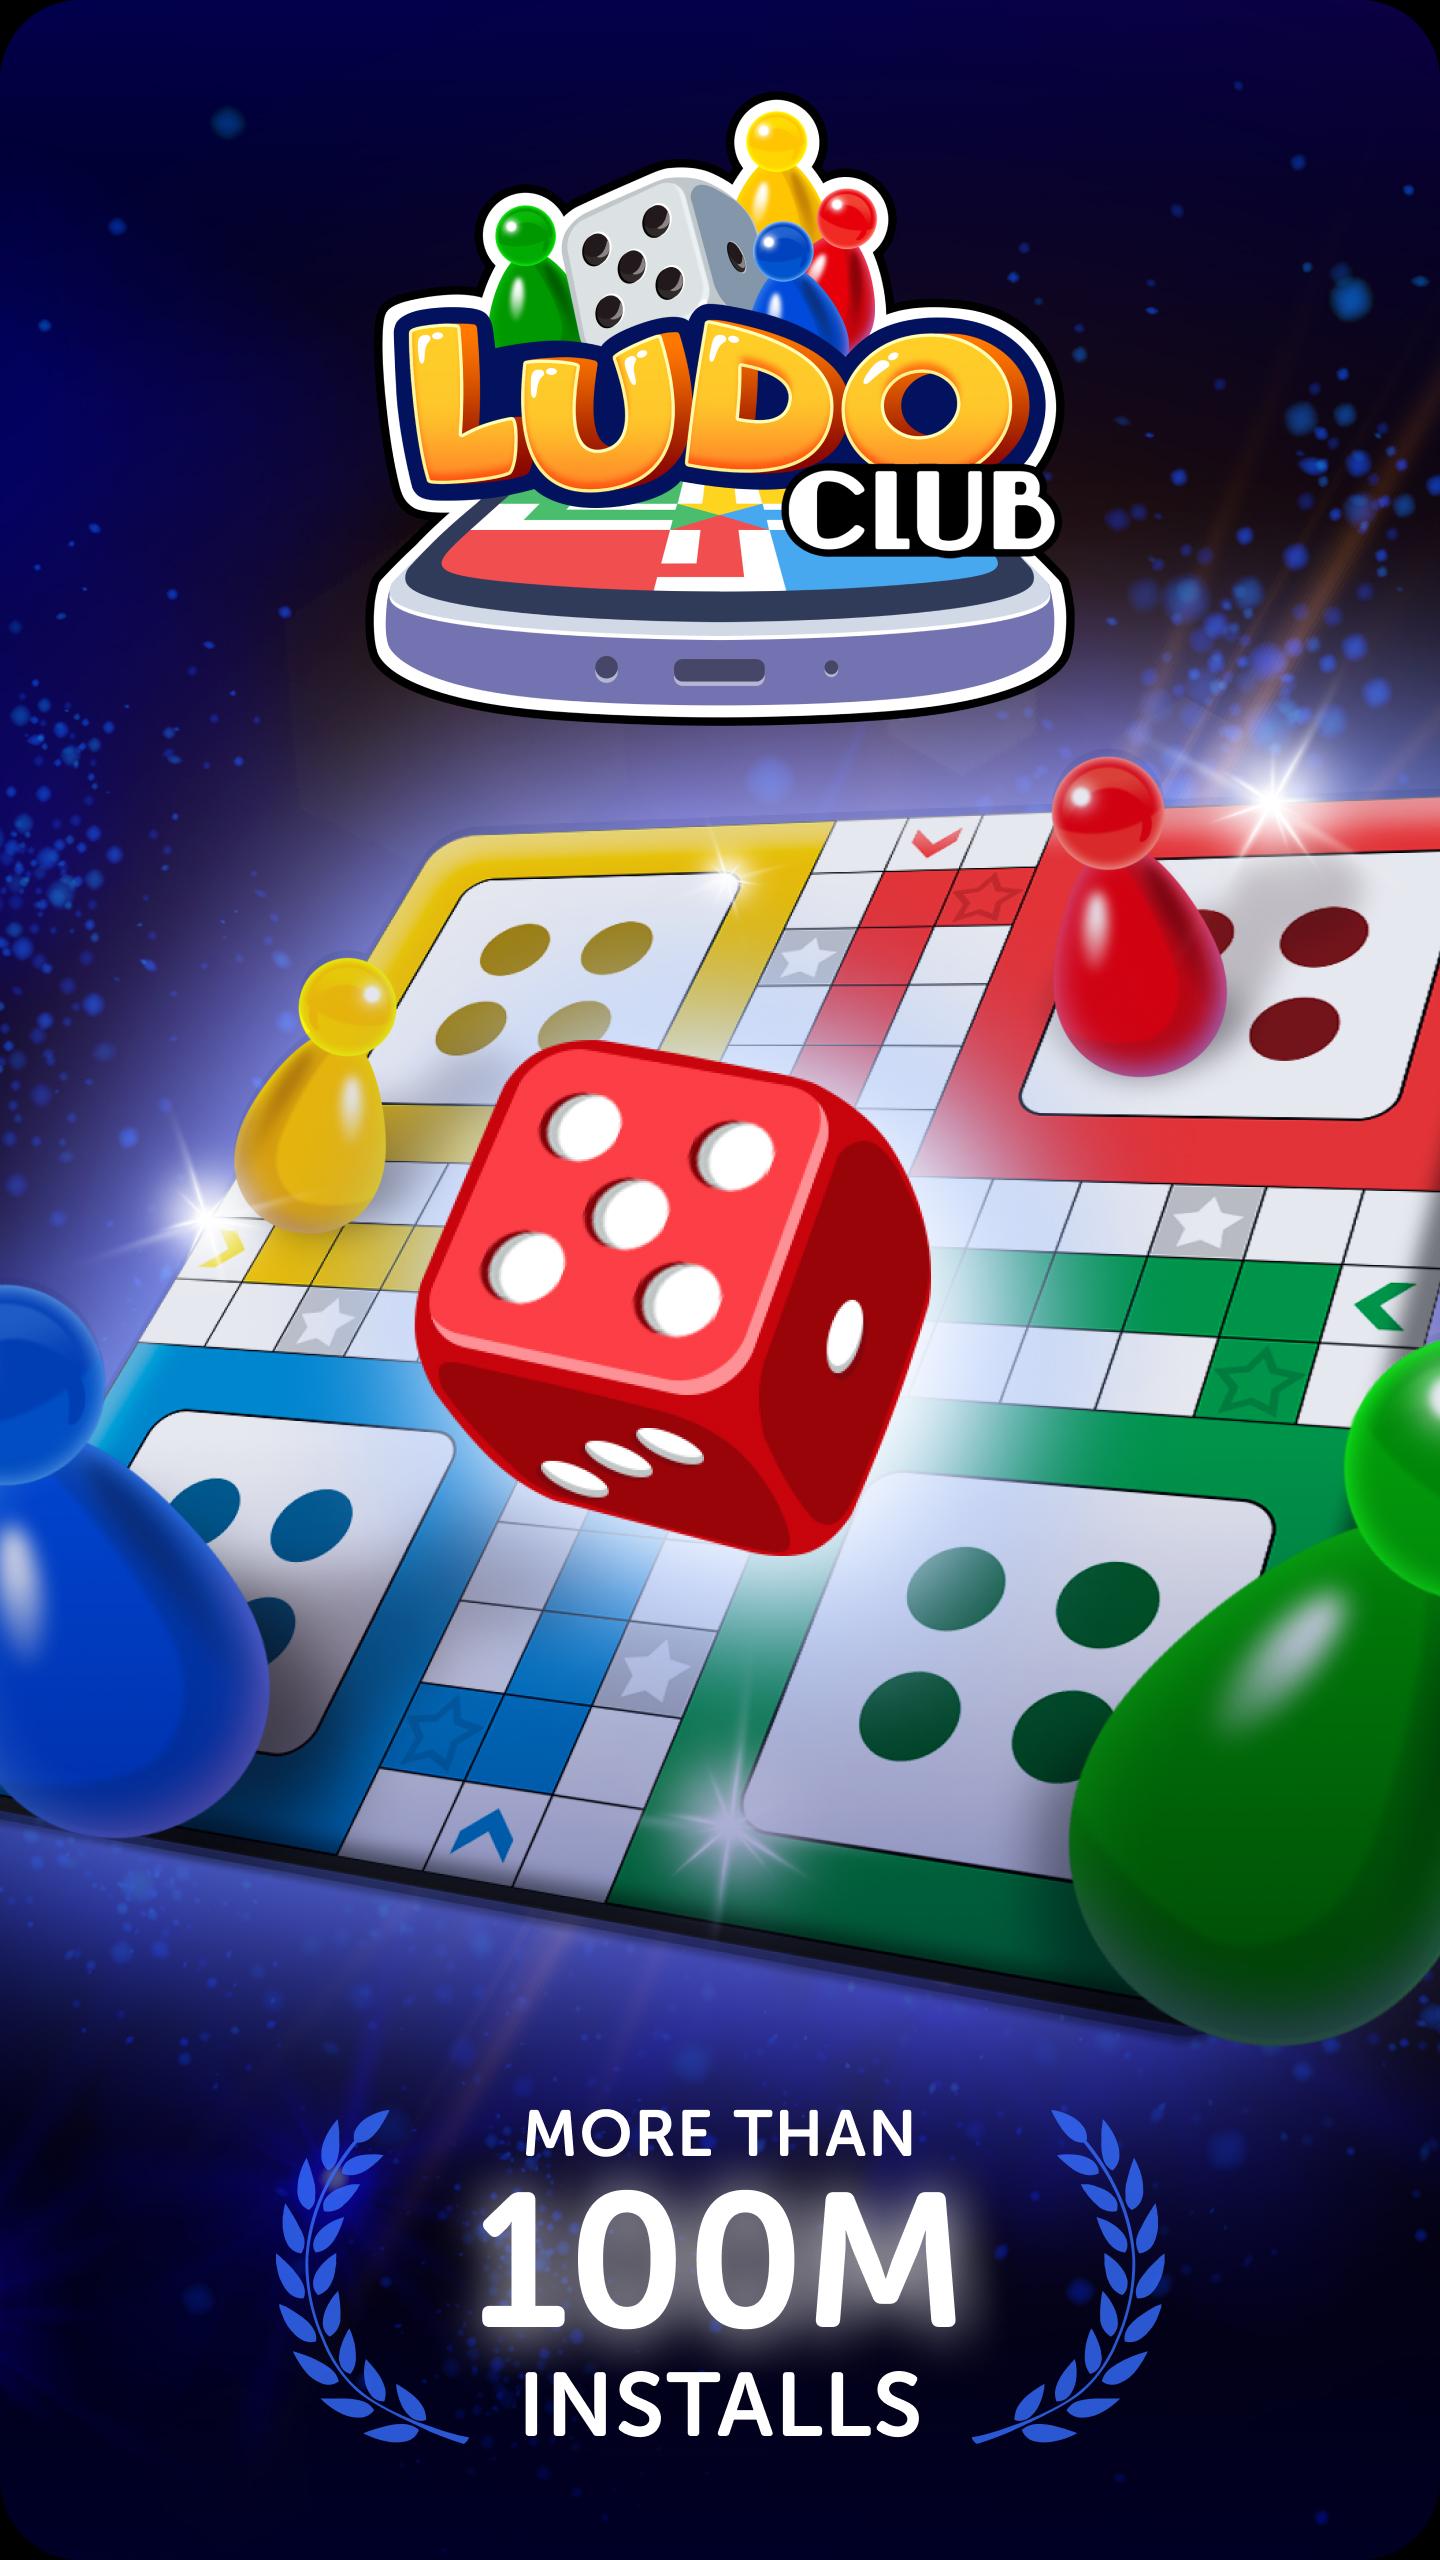 Ludo Club - Board of playing the same old games? Time to